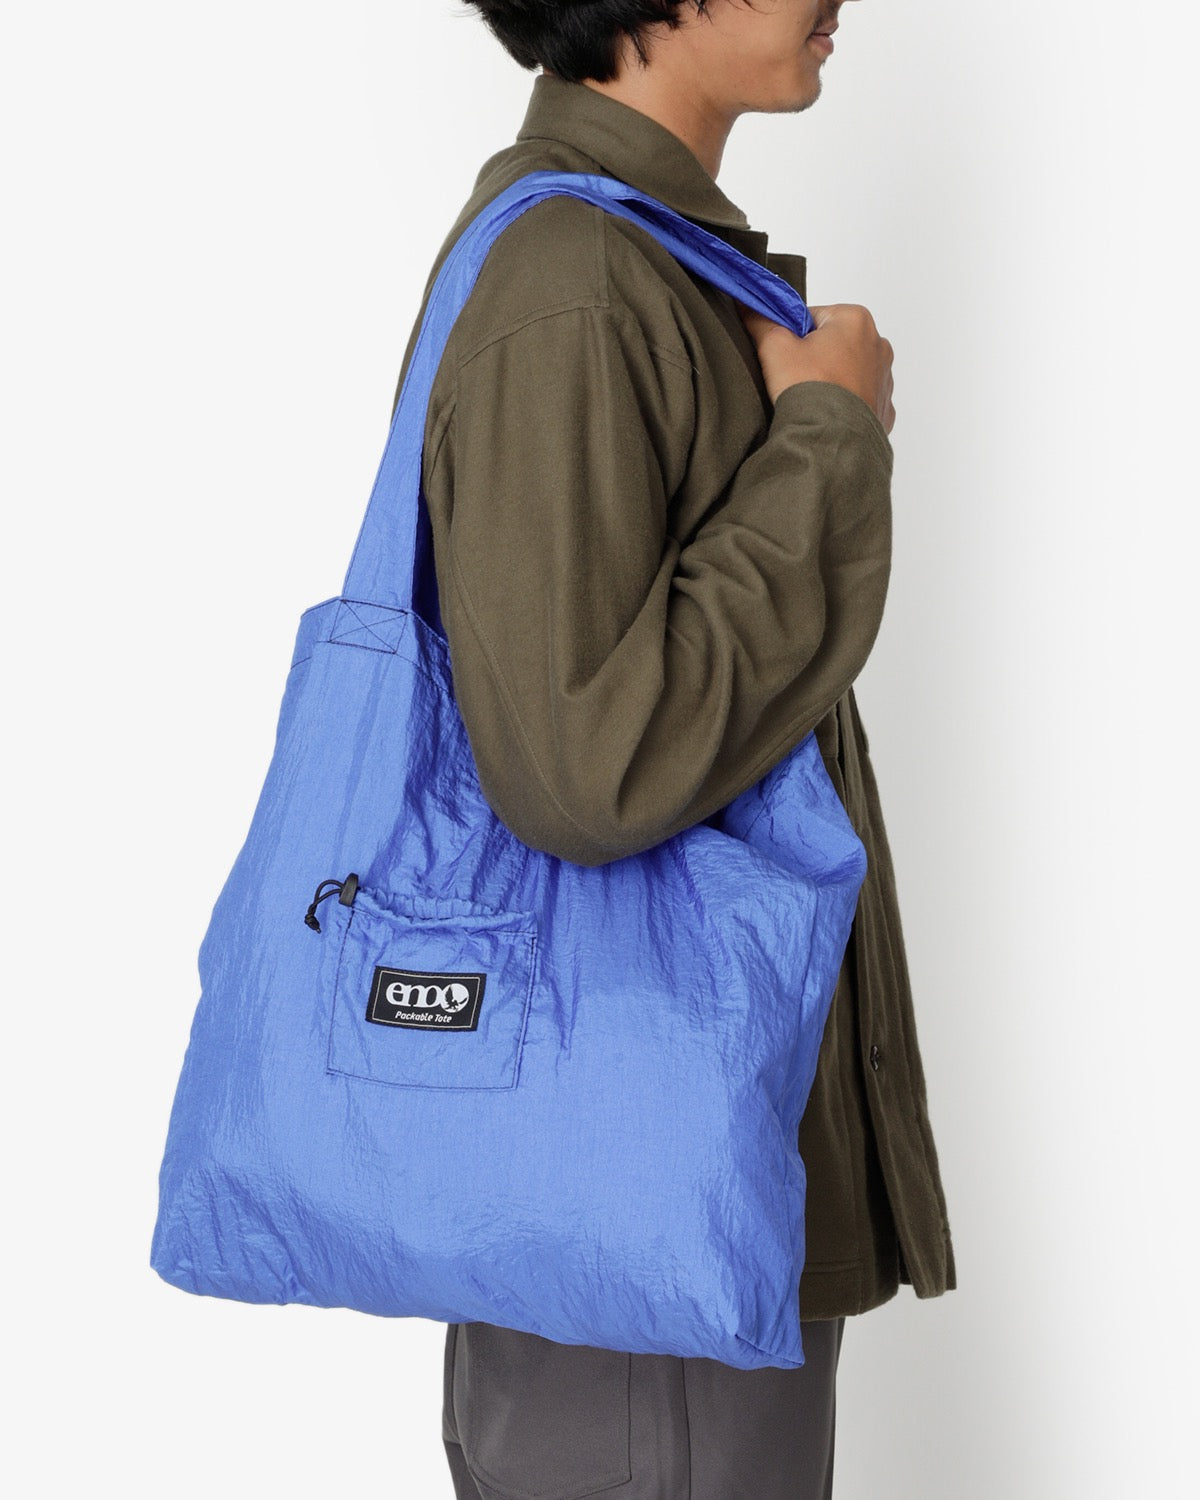 PACKABLE TOTE